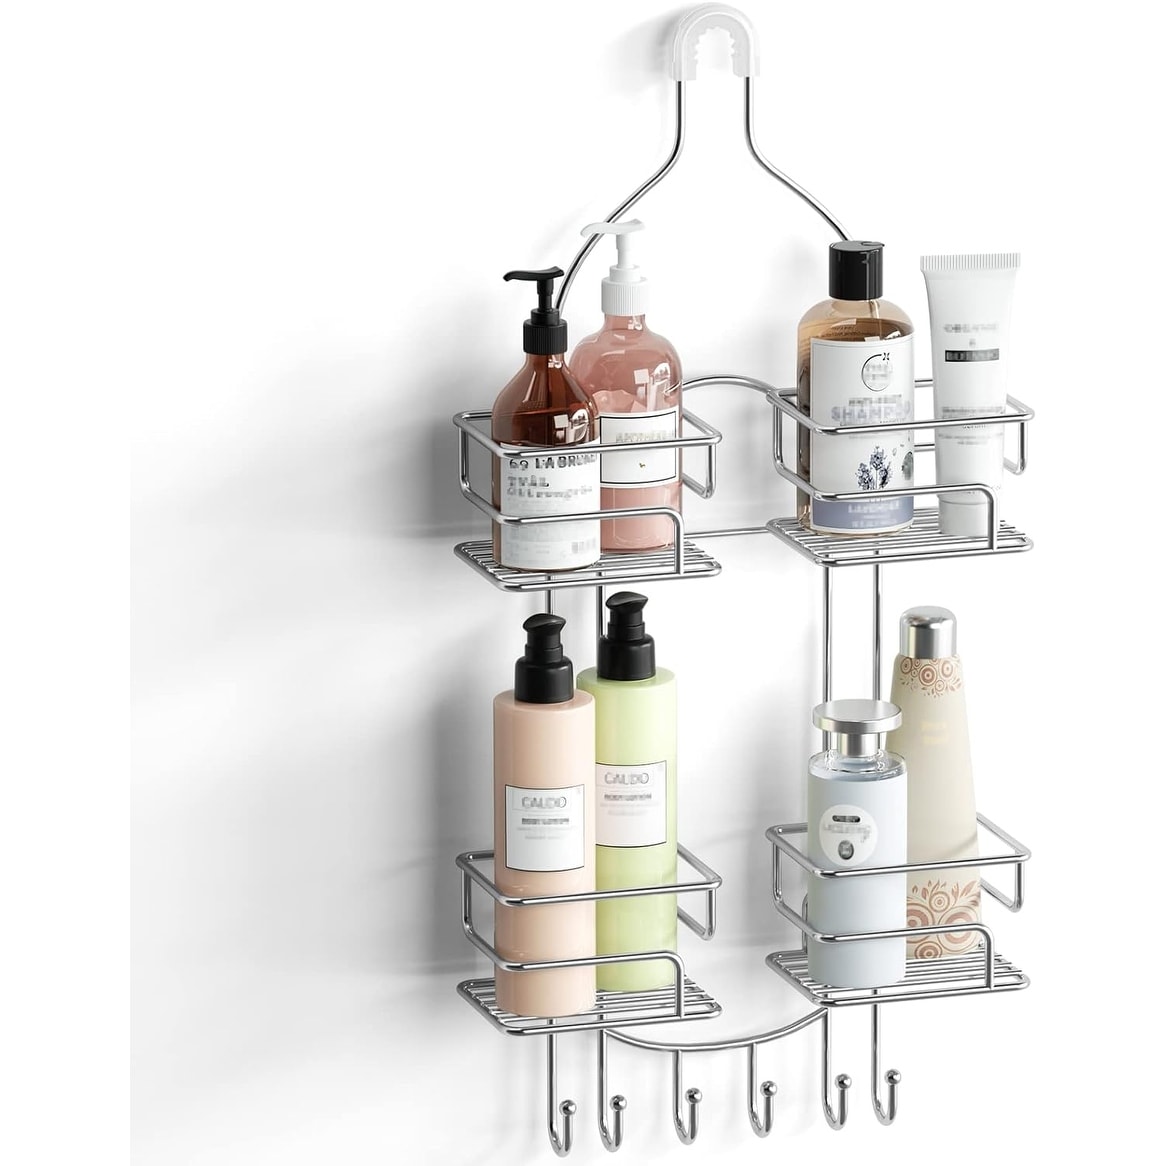 https://ak1.ostkcdn.com/images/products/is/images/direct/12b98e36672a9009f4918fe0c5d7375f4ee9d1ee/Bathroom-Shower-Rack-Hanger-with-Hooks-for-Razors.jpg